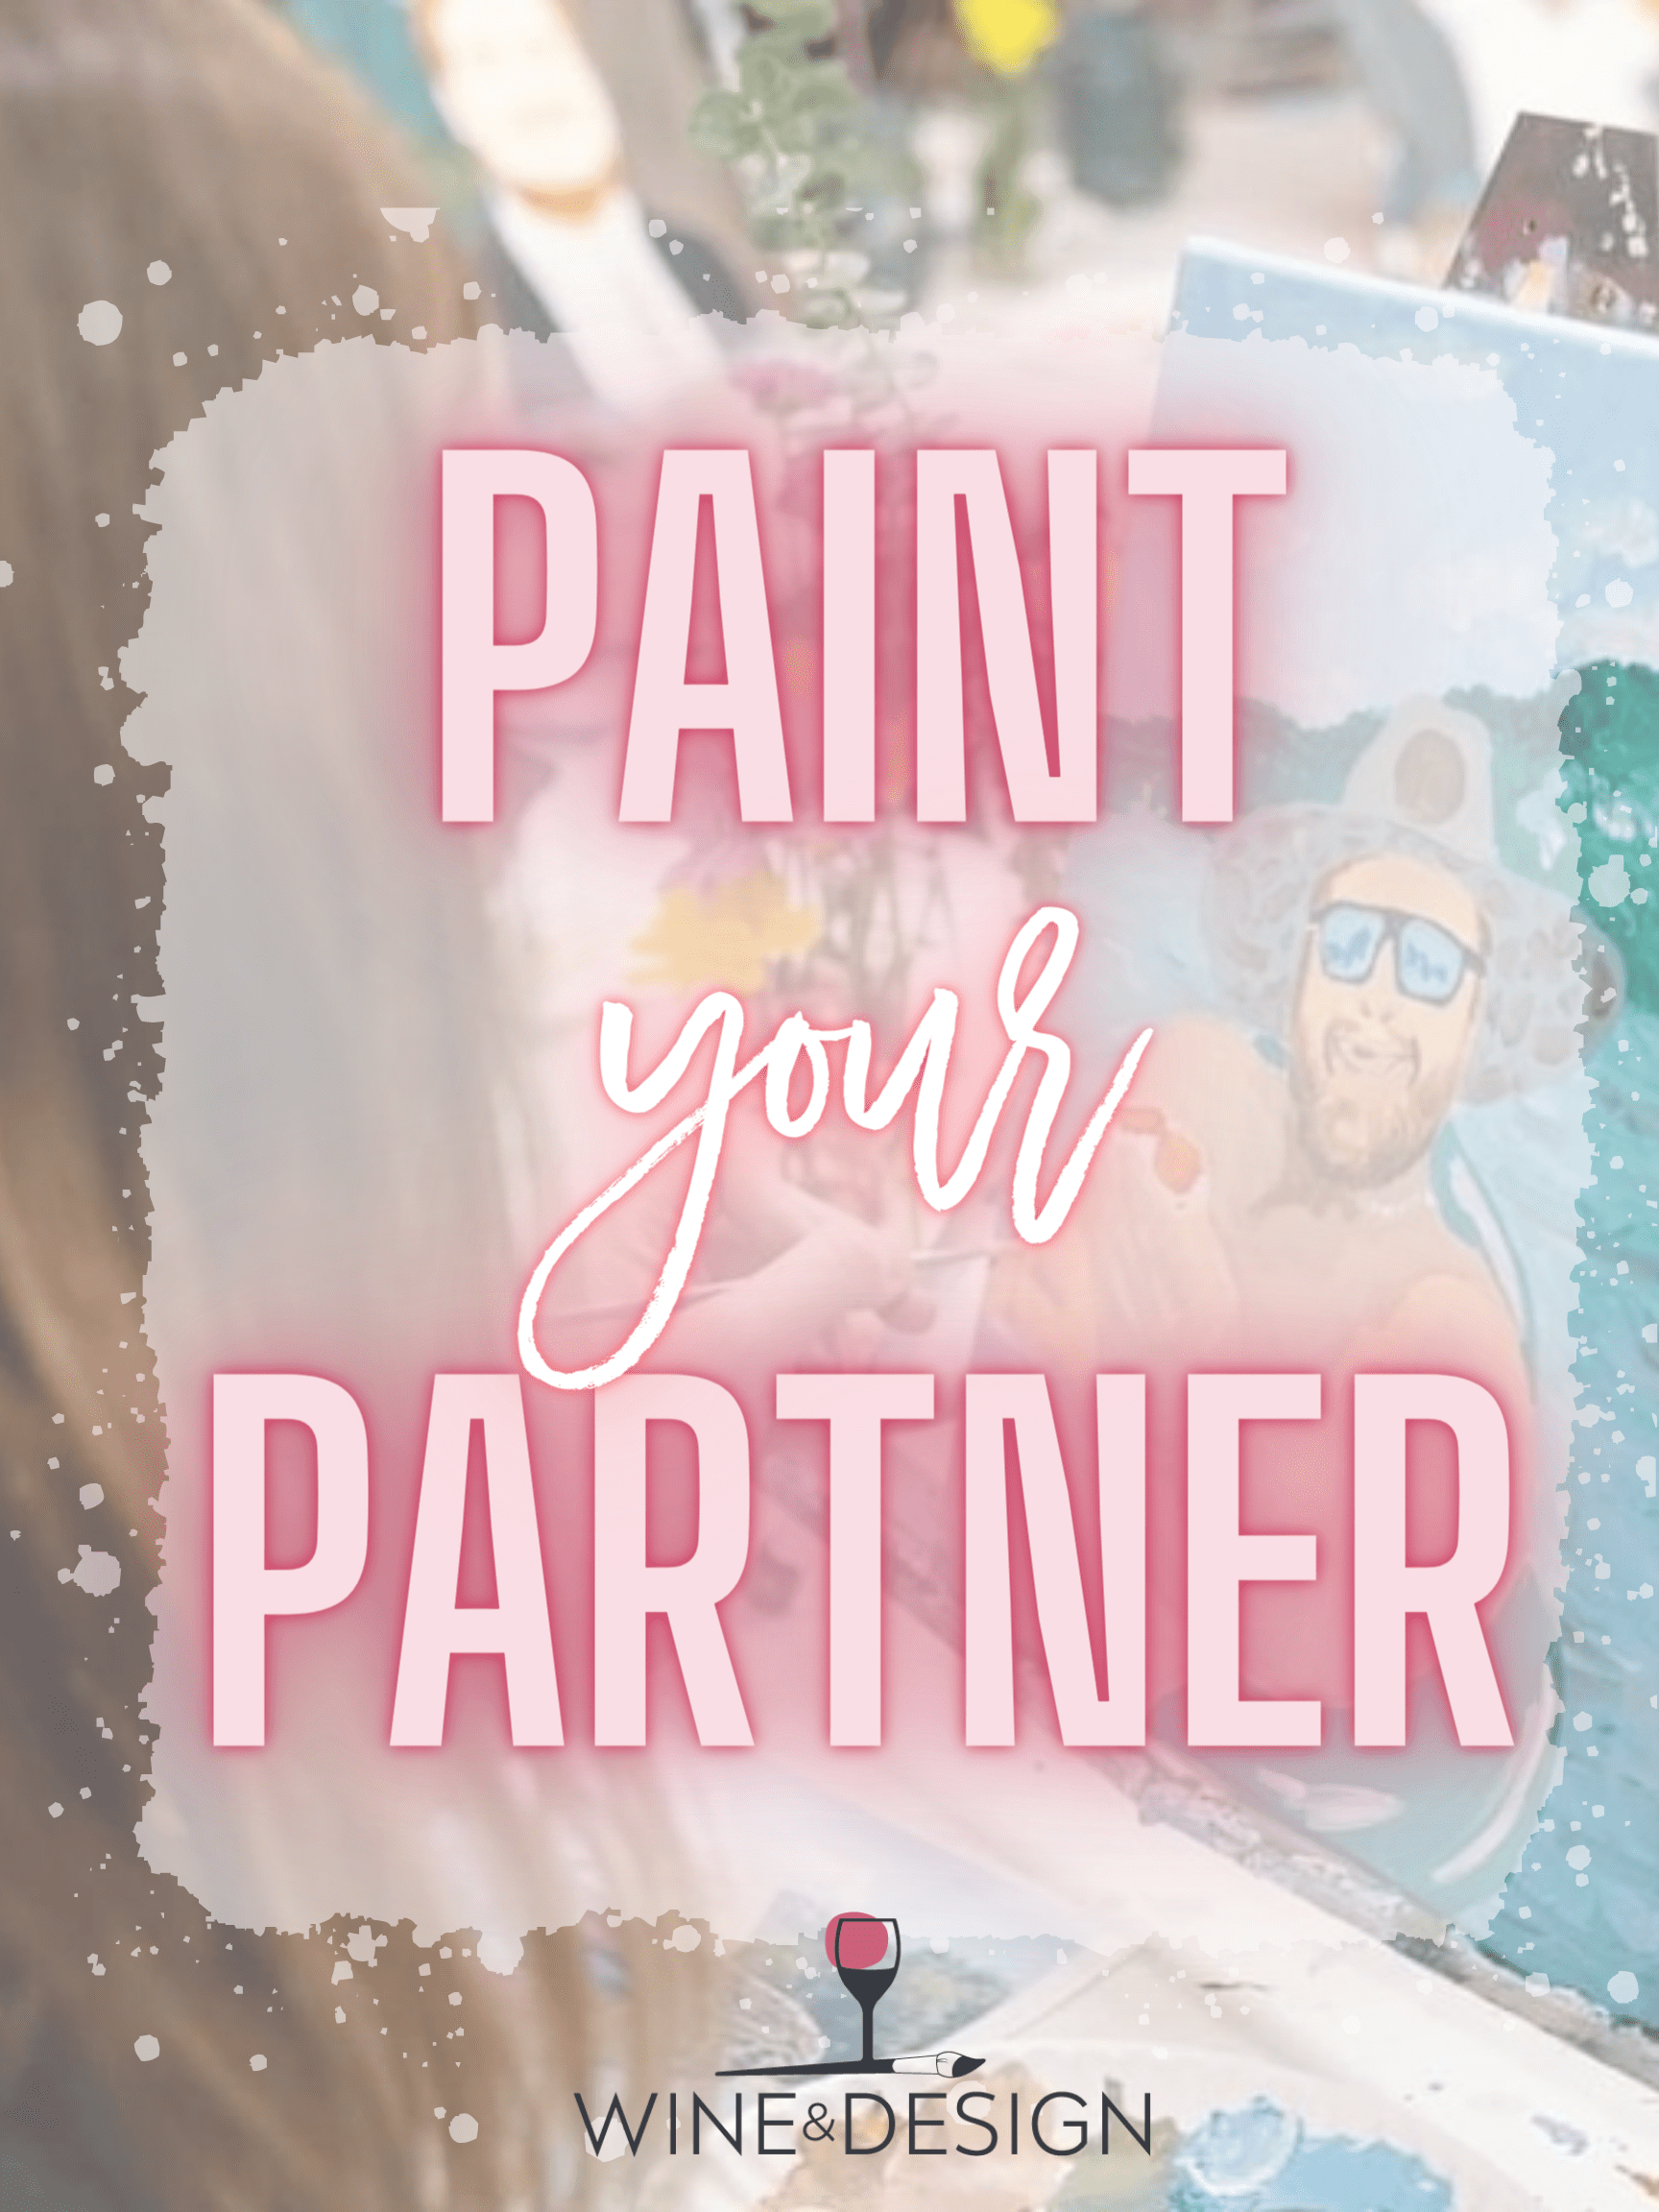 Paint Your Partner Date Night - One ticket covers two painters!